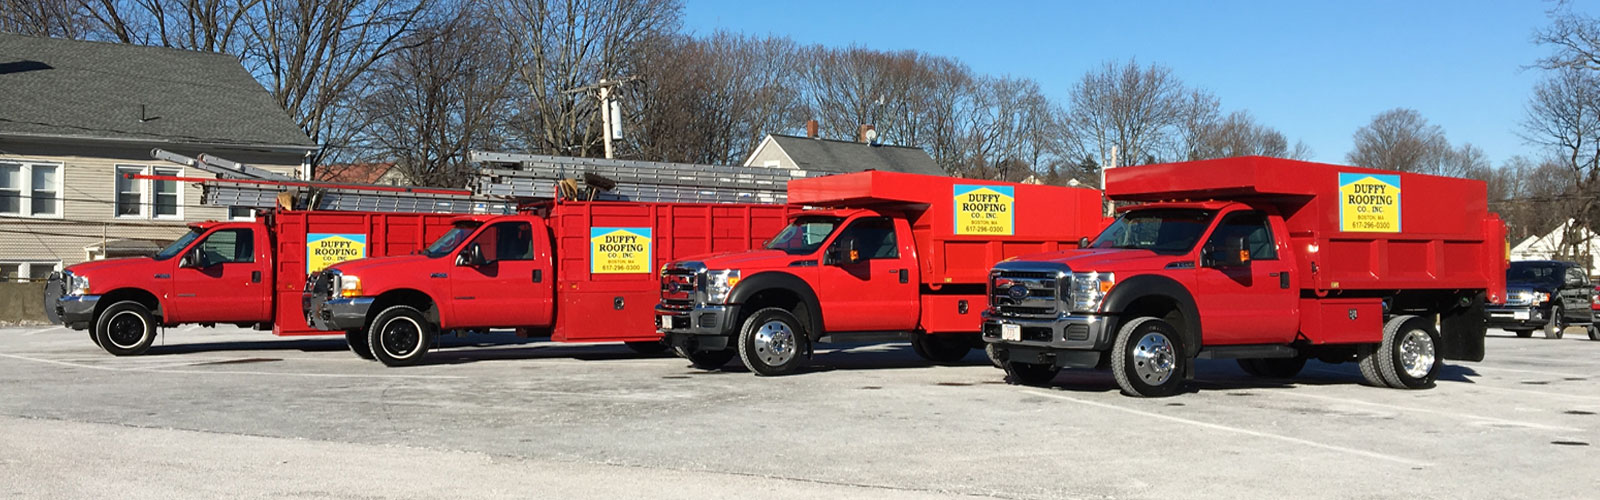 Duffy Roofing Co., Inc. red work trucks lined up in a row in a parking lot